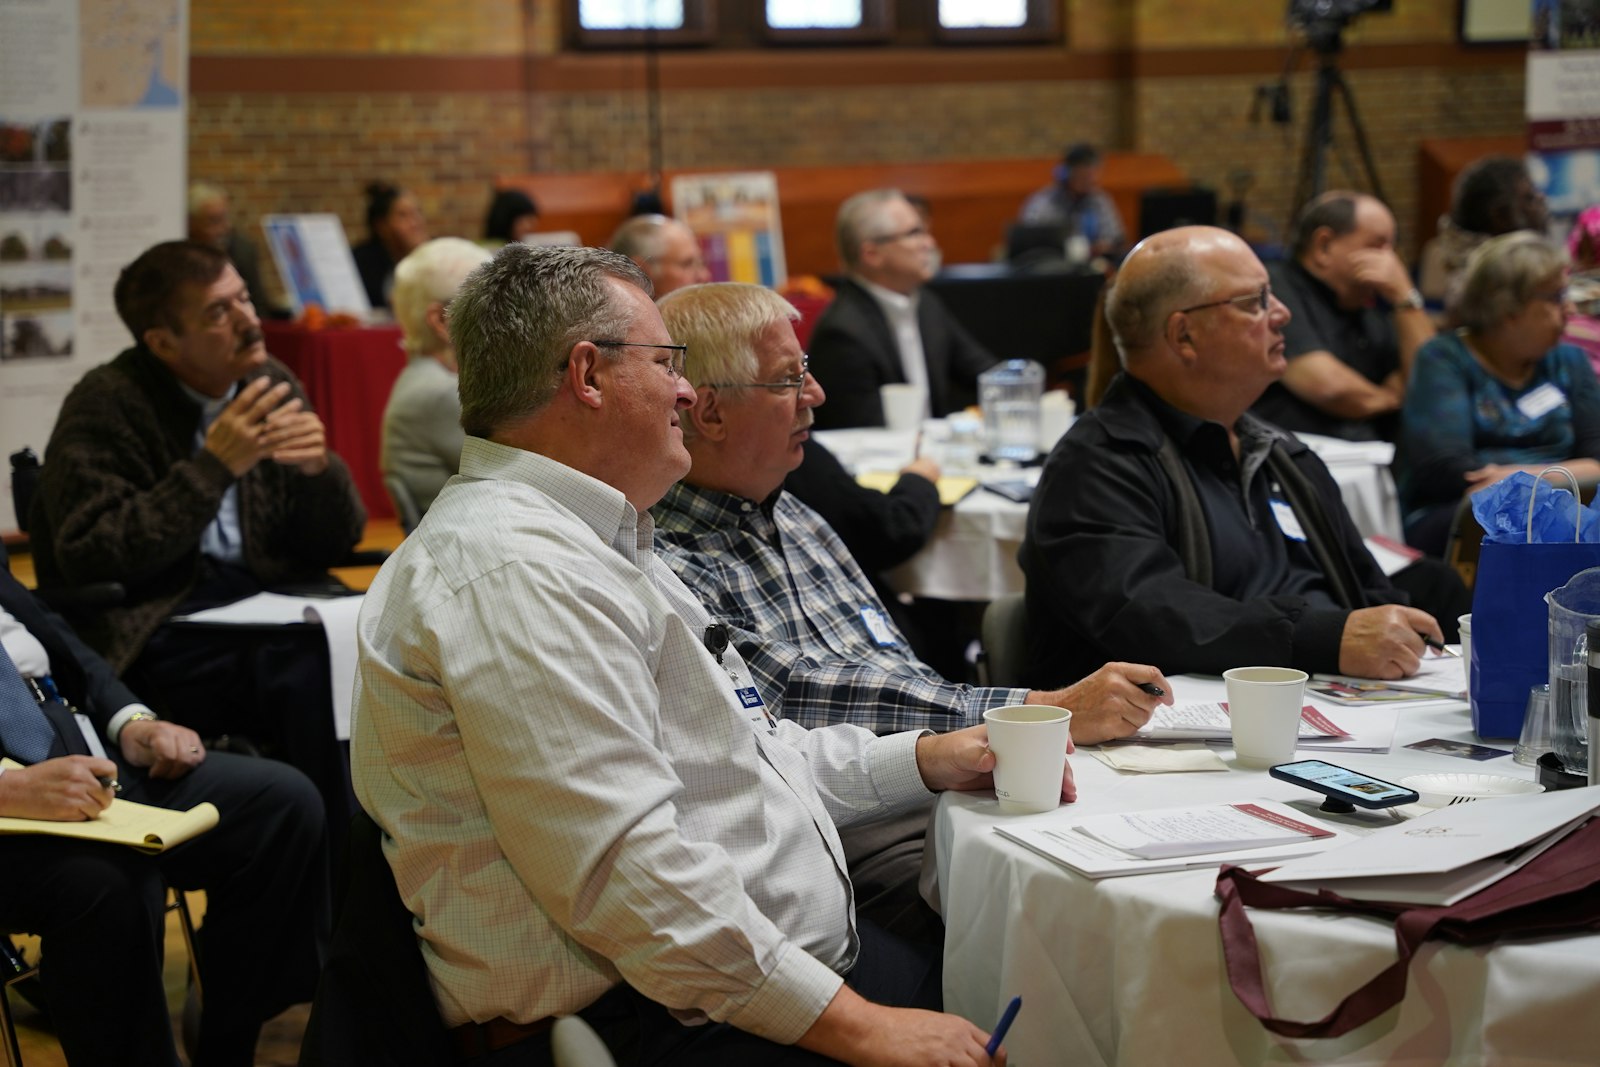 The professional development day was sponsored by Catholic Funeral and Cemetery Services to better equip ministers to walk with those making end-of-life medical decisions and with families dealing with death, as well as accompaniment from hospice to mourning.